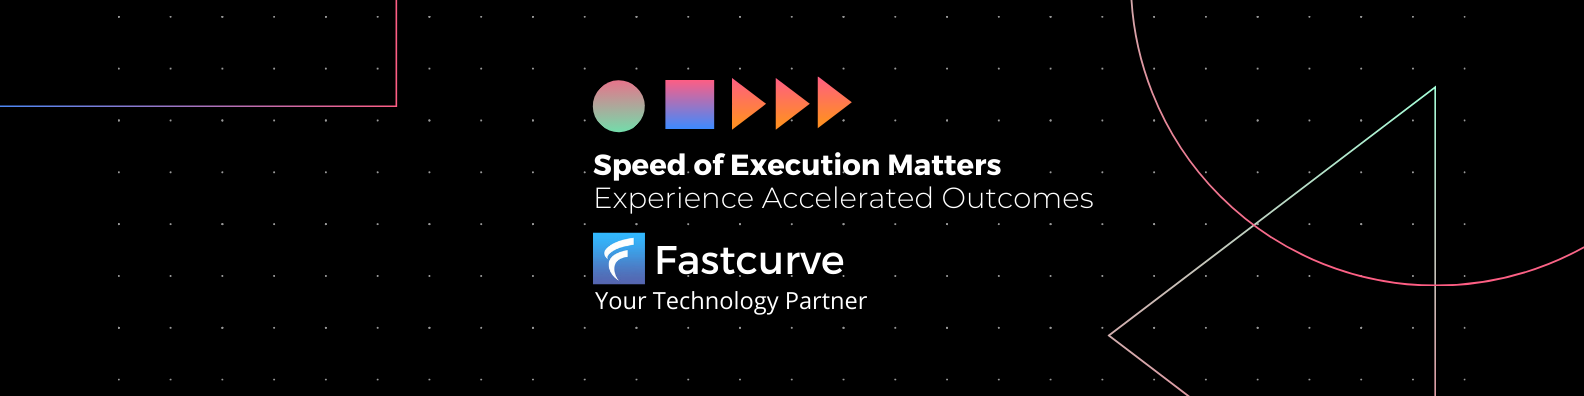 IT Services Company | IT Consulting Firms - Fastcurve